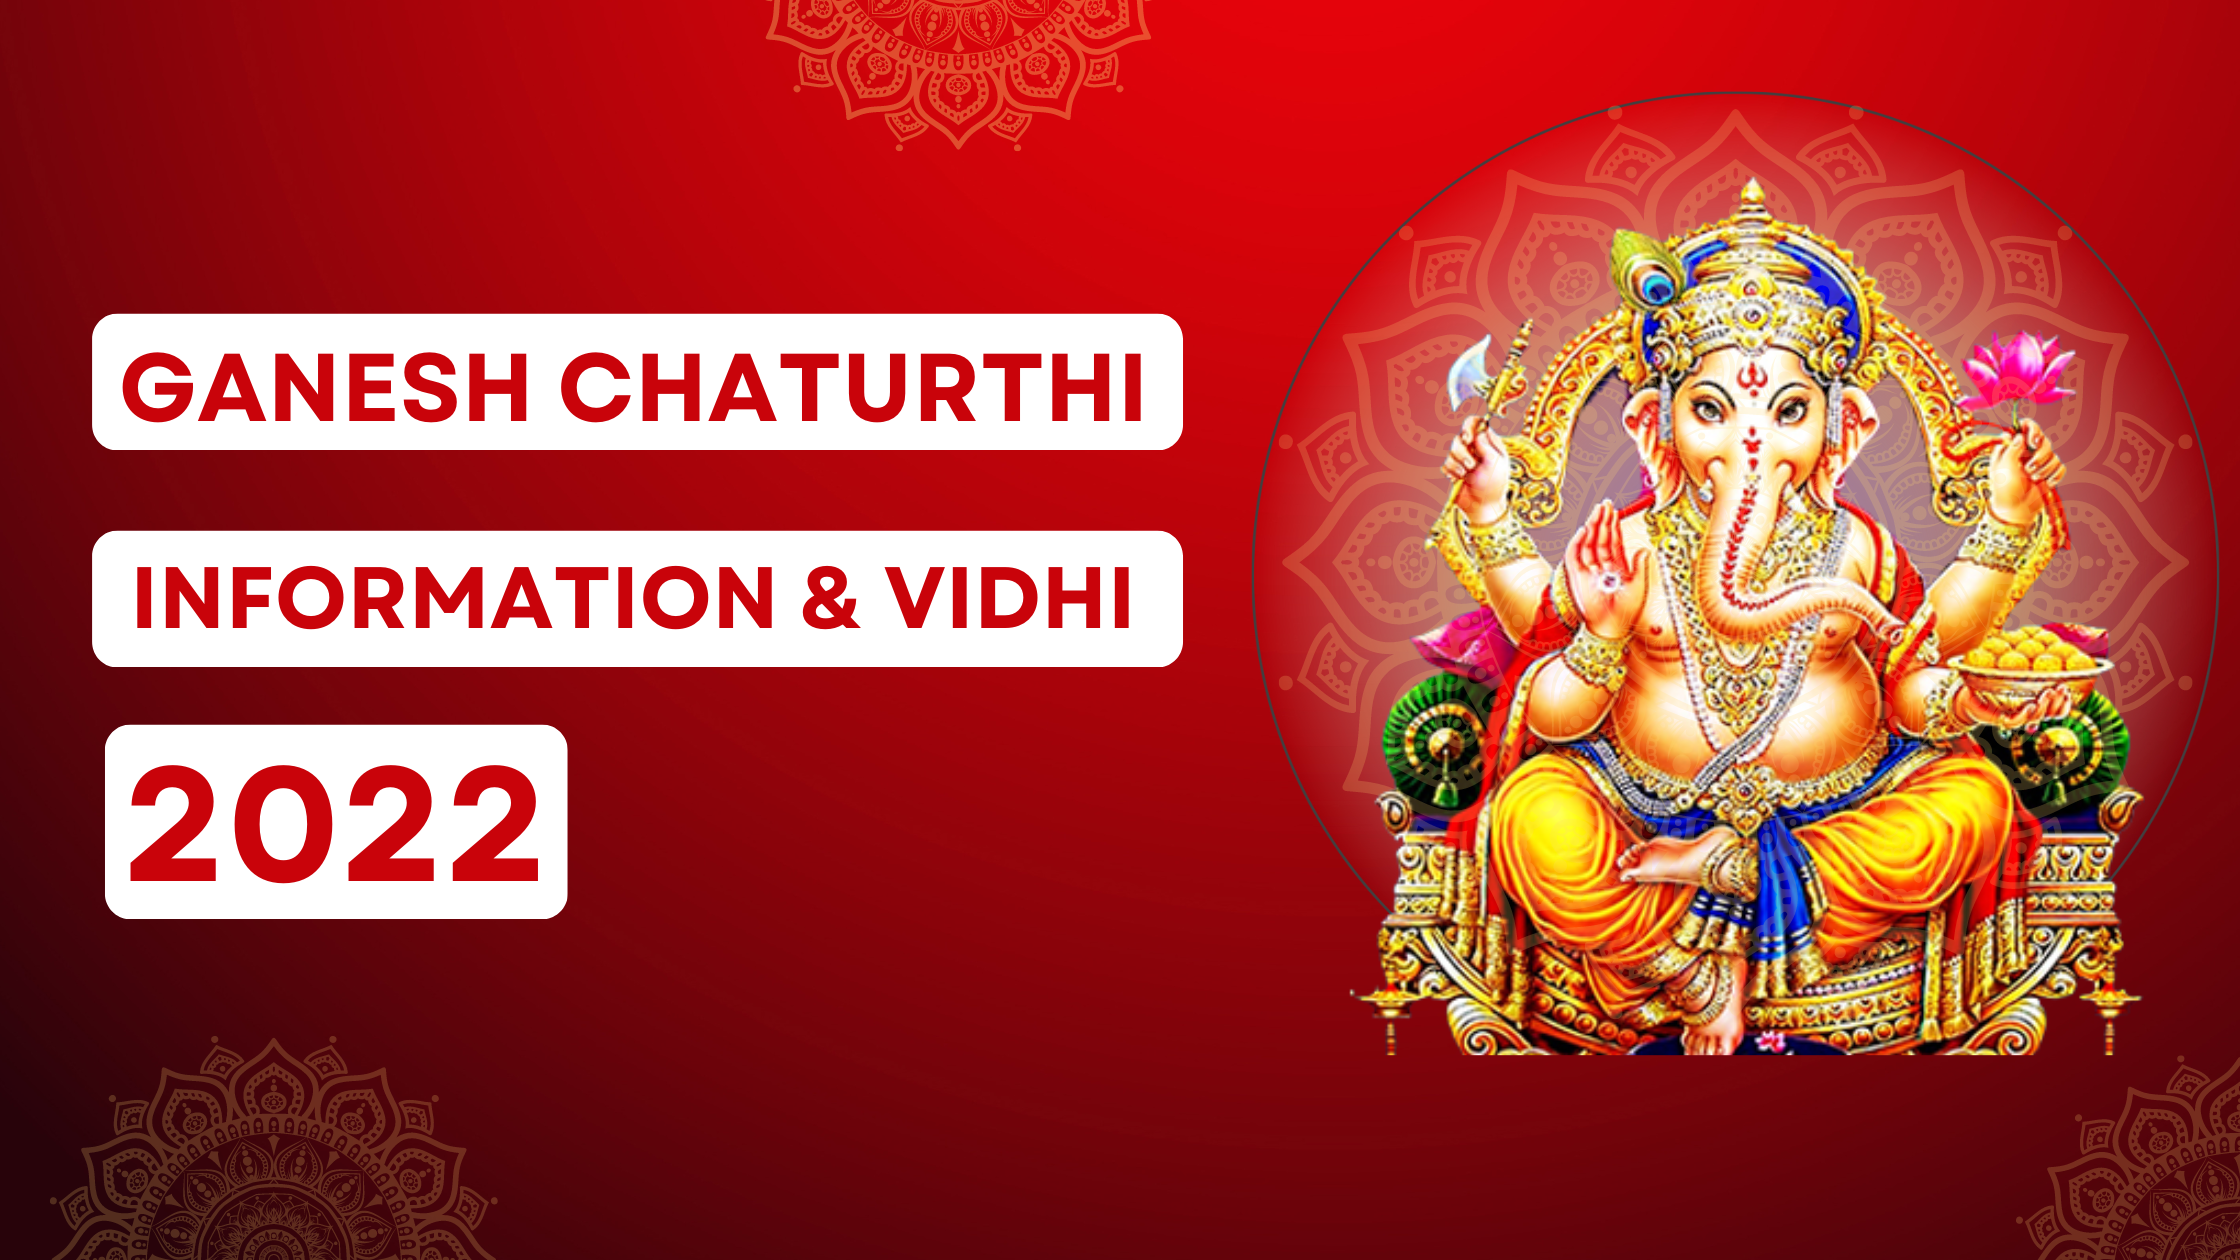 You are currently viewing Ganesh Chaturthi 2022 – Information & Vidhi